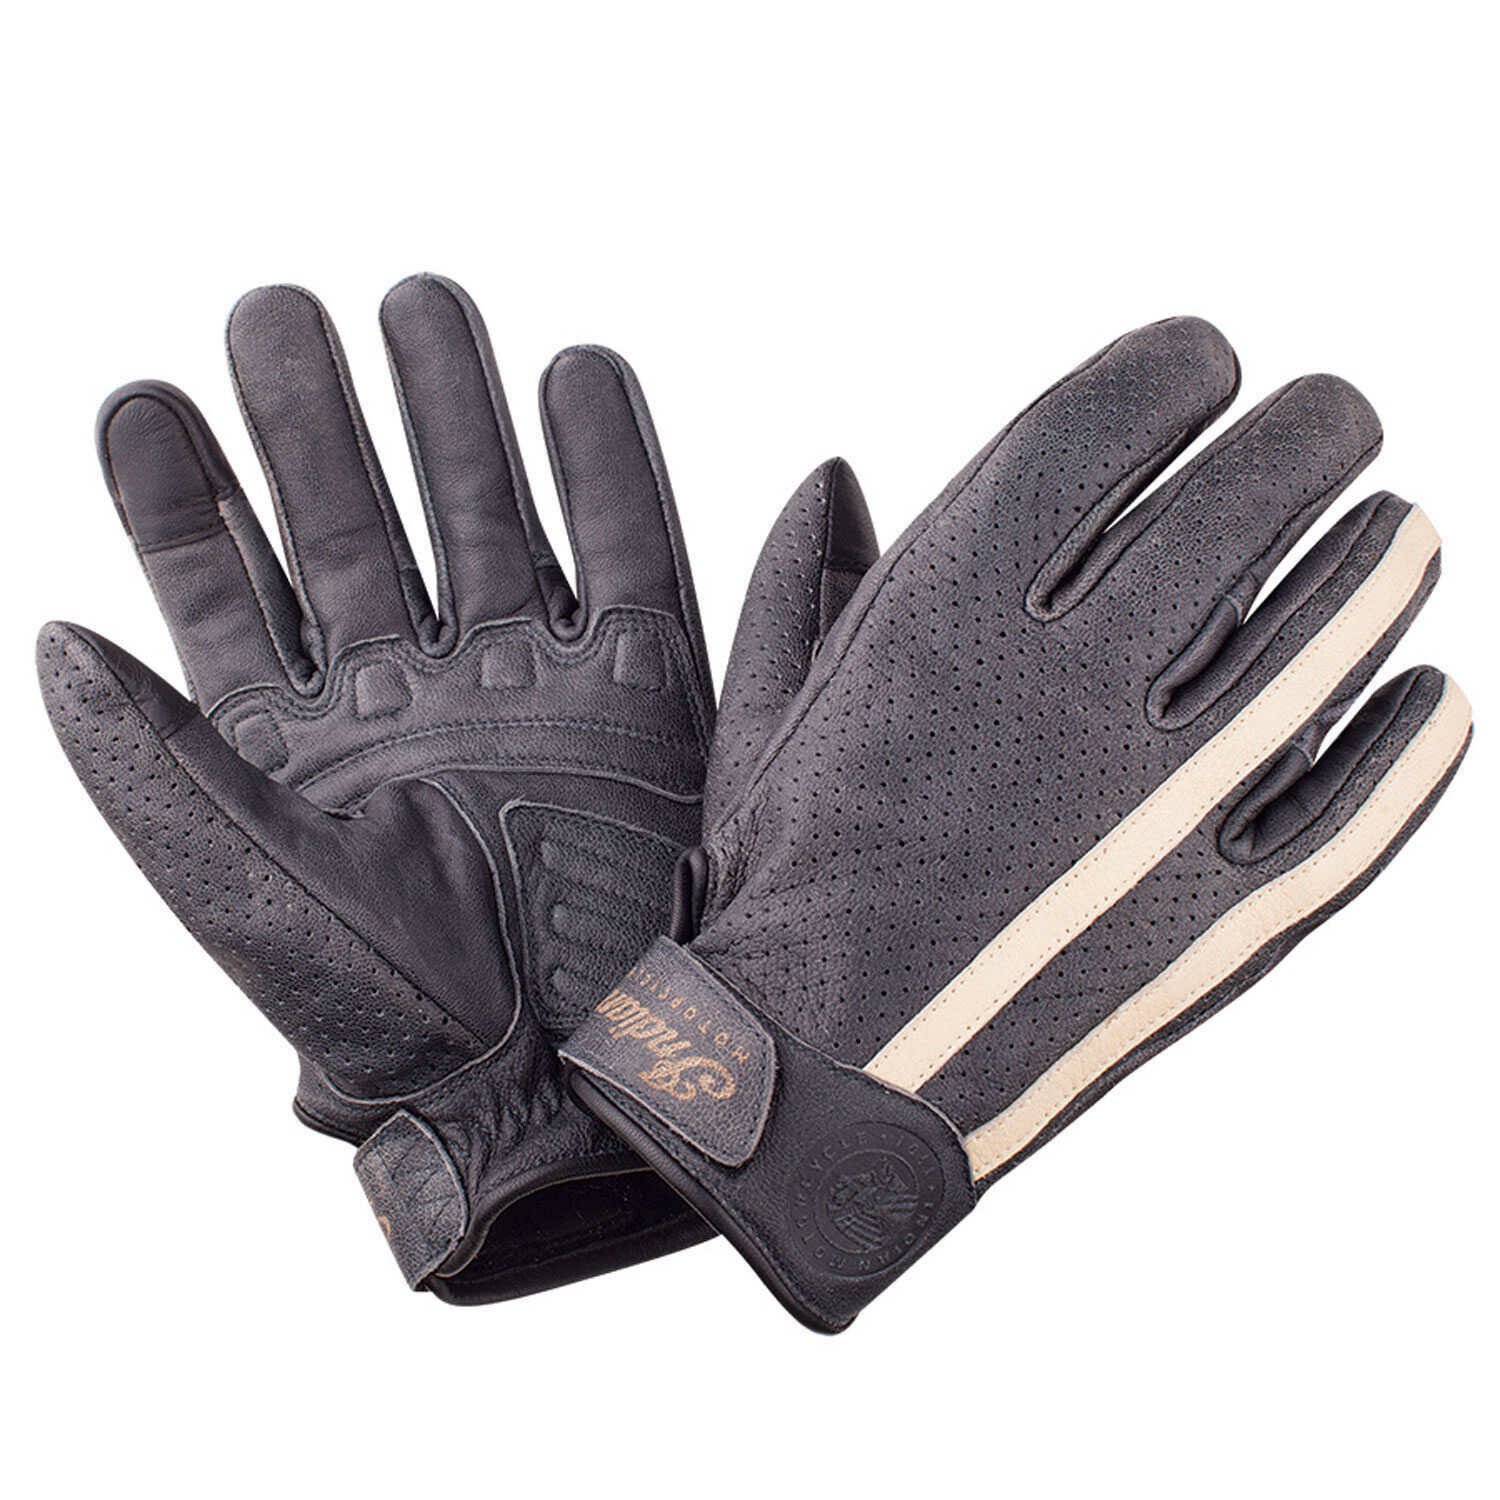 PERFORMANCE ROUTE RIDING GLOVE MENS